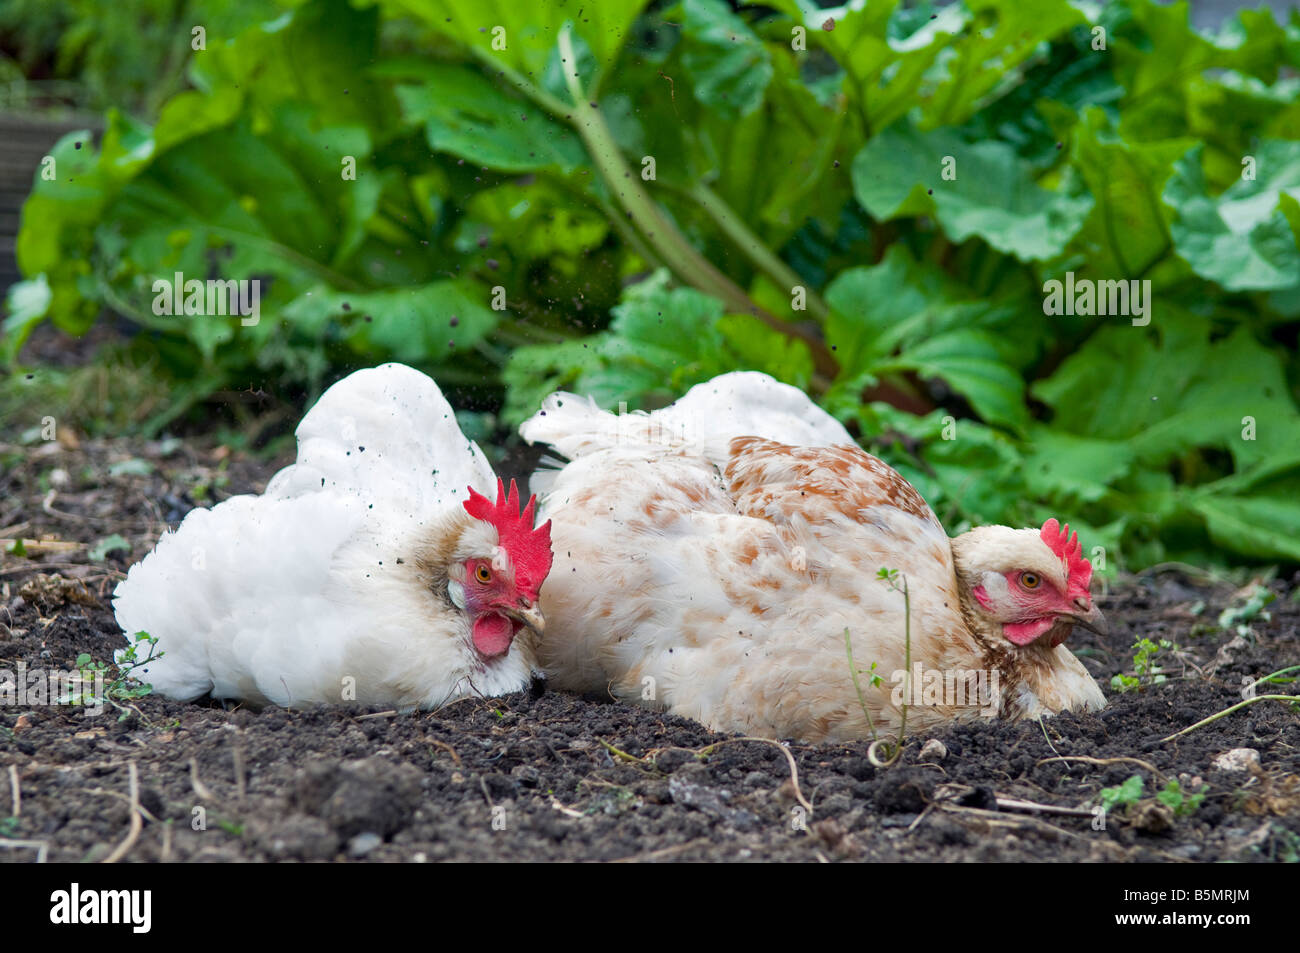 Two chickens or hens, a White Star and a Brown Amber, in the middle of a dirt bath. There are rhubarb plants behind them. Stock Photo